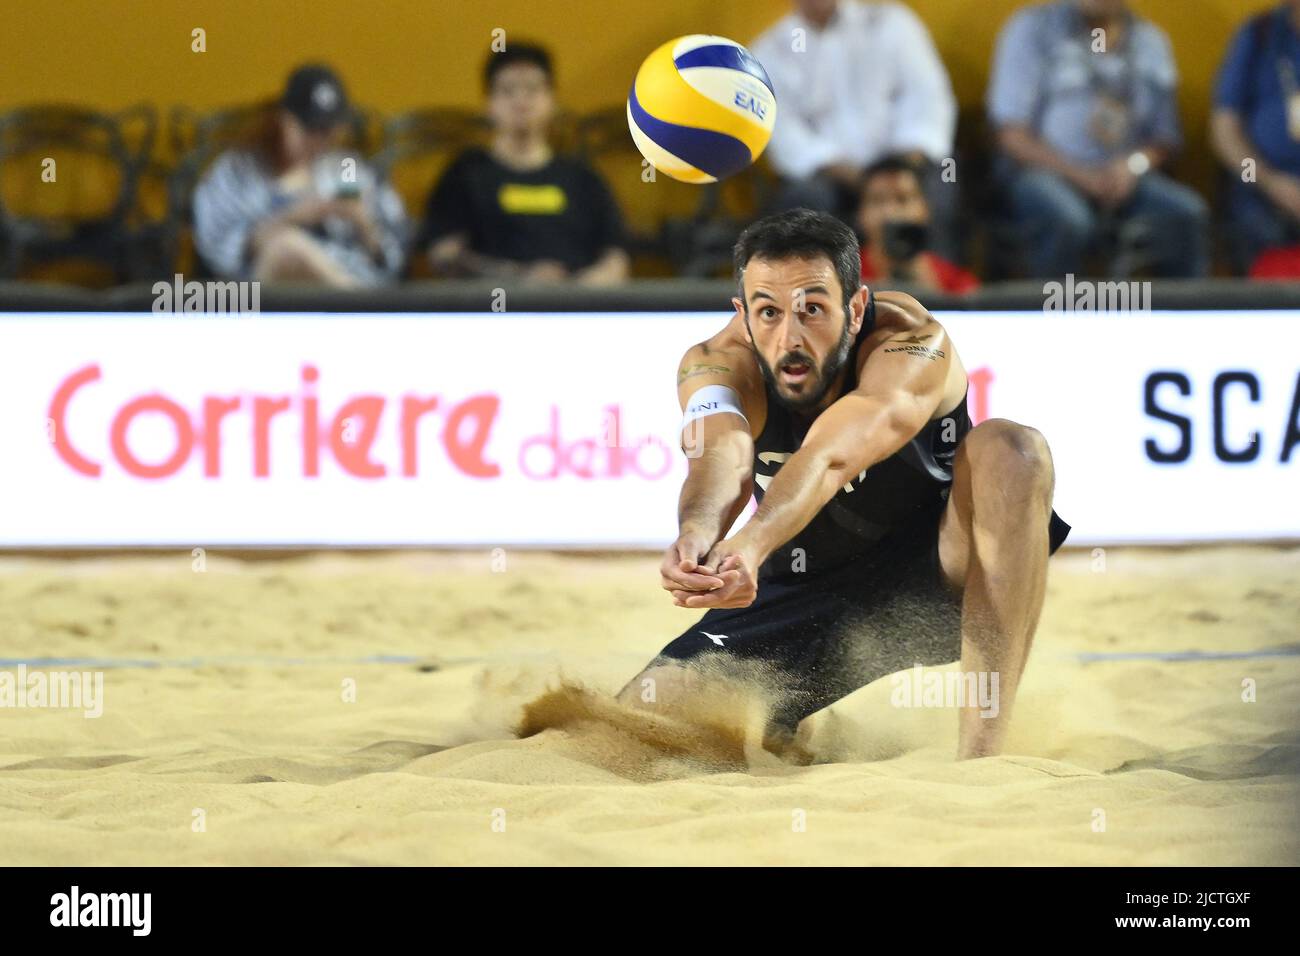 Rome, Italy. 15th June, 2022. Paolo Nicolai (ITA) during the Beach  Volleyball World Championships Round of 32 on 15th June 2022 at the Foro  Italico in Rome, Italy. Credit: Independent Photo Agency/Alamy